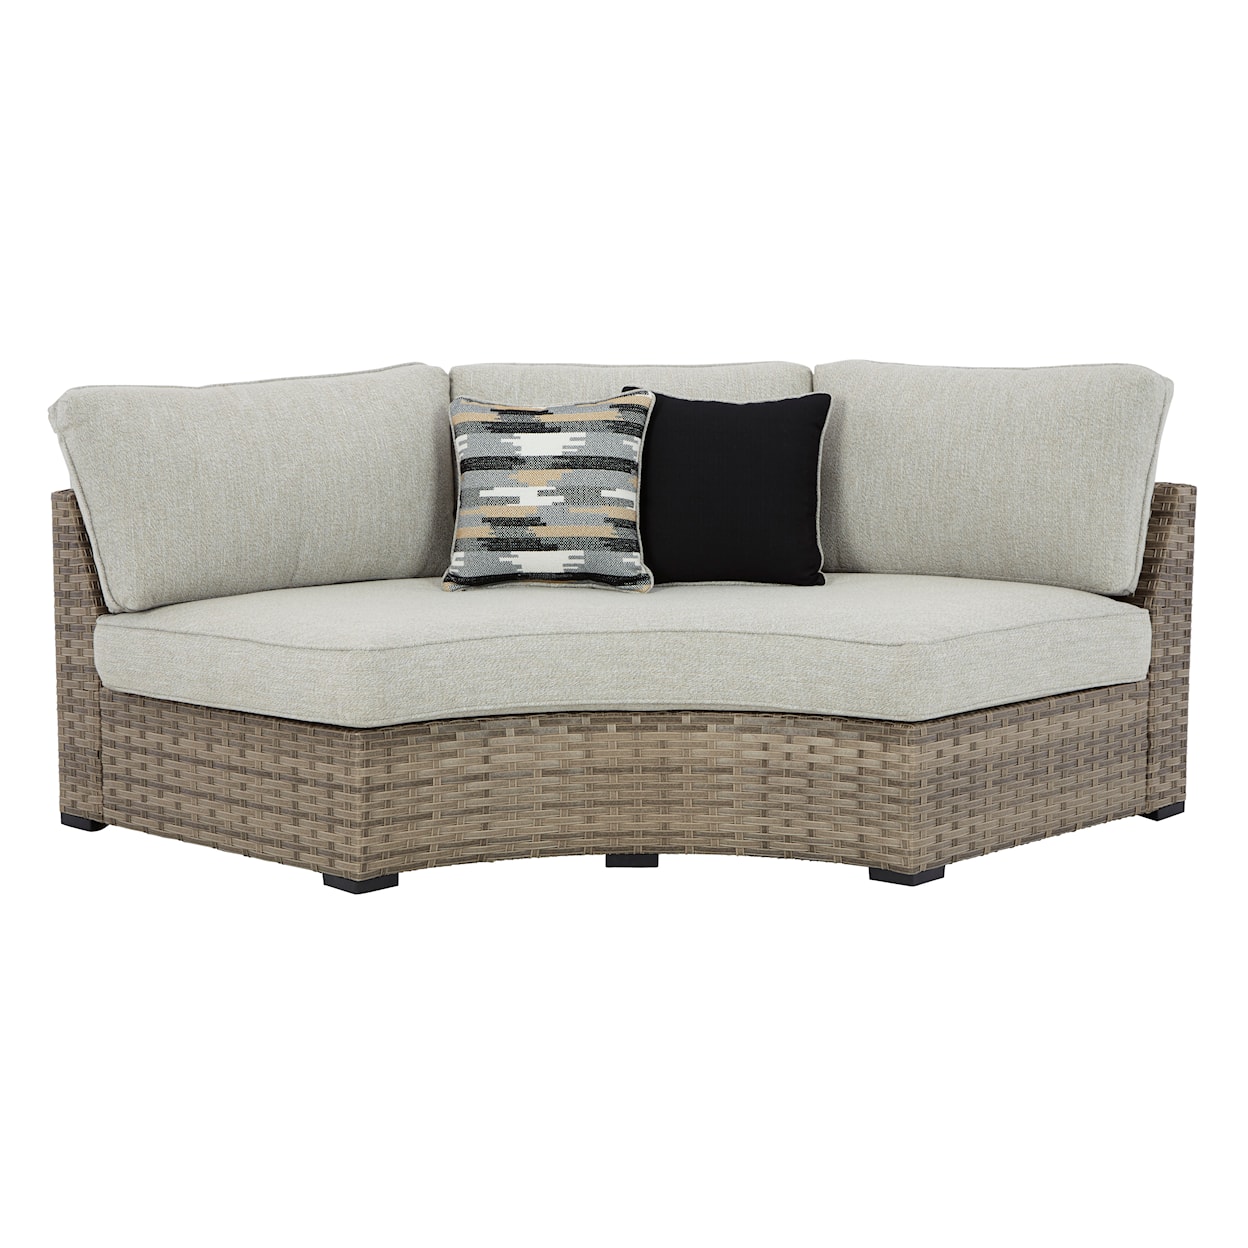 Ashley Furniture Signature Design Calworth Outdoor Curved Loveseat with Cushion